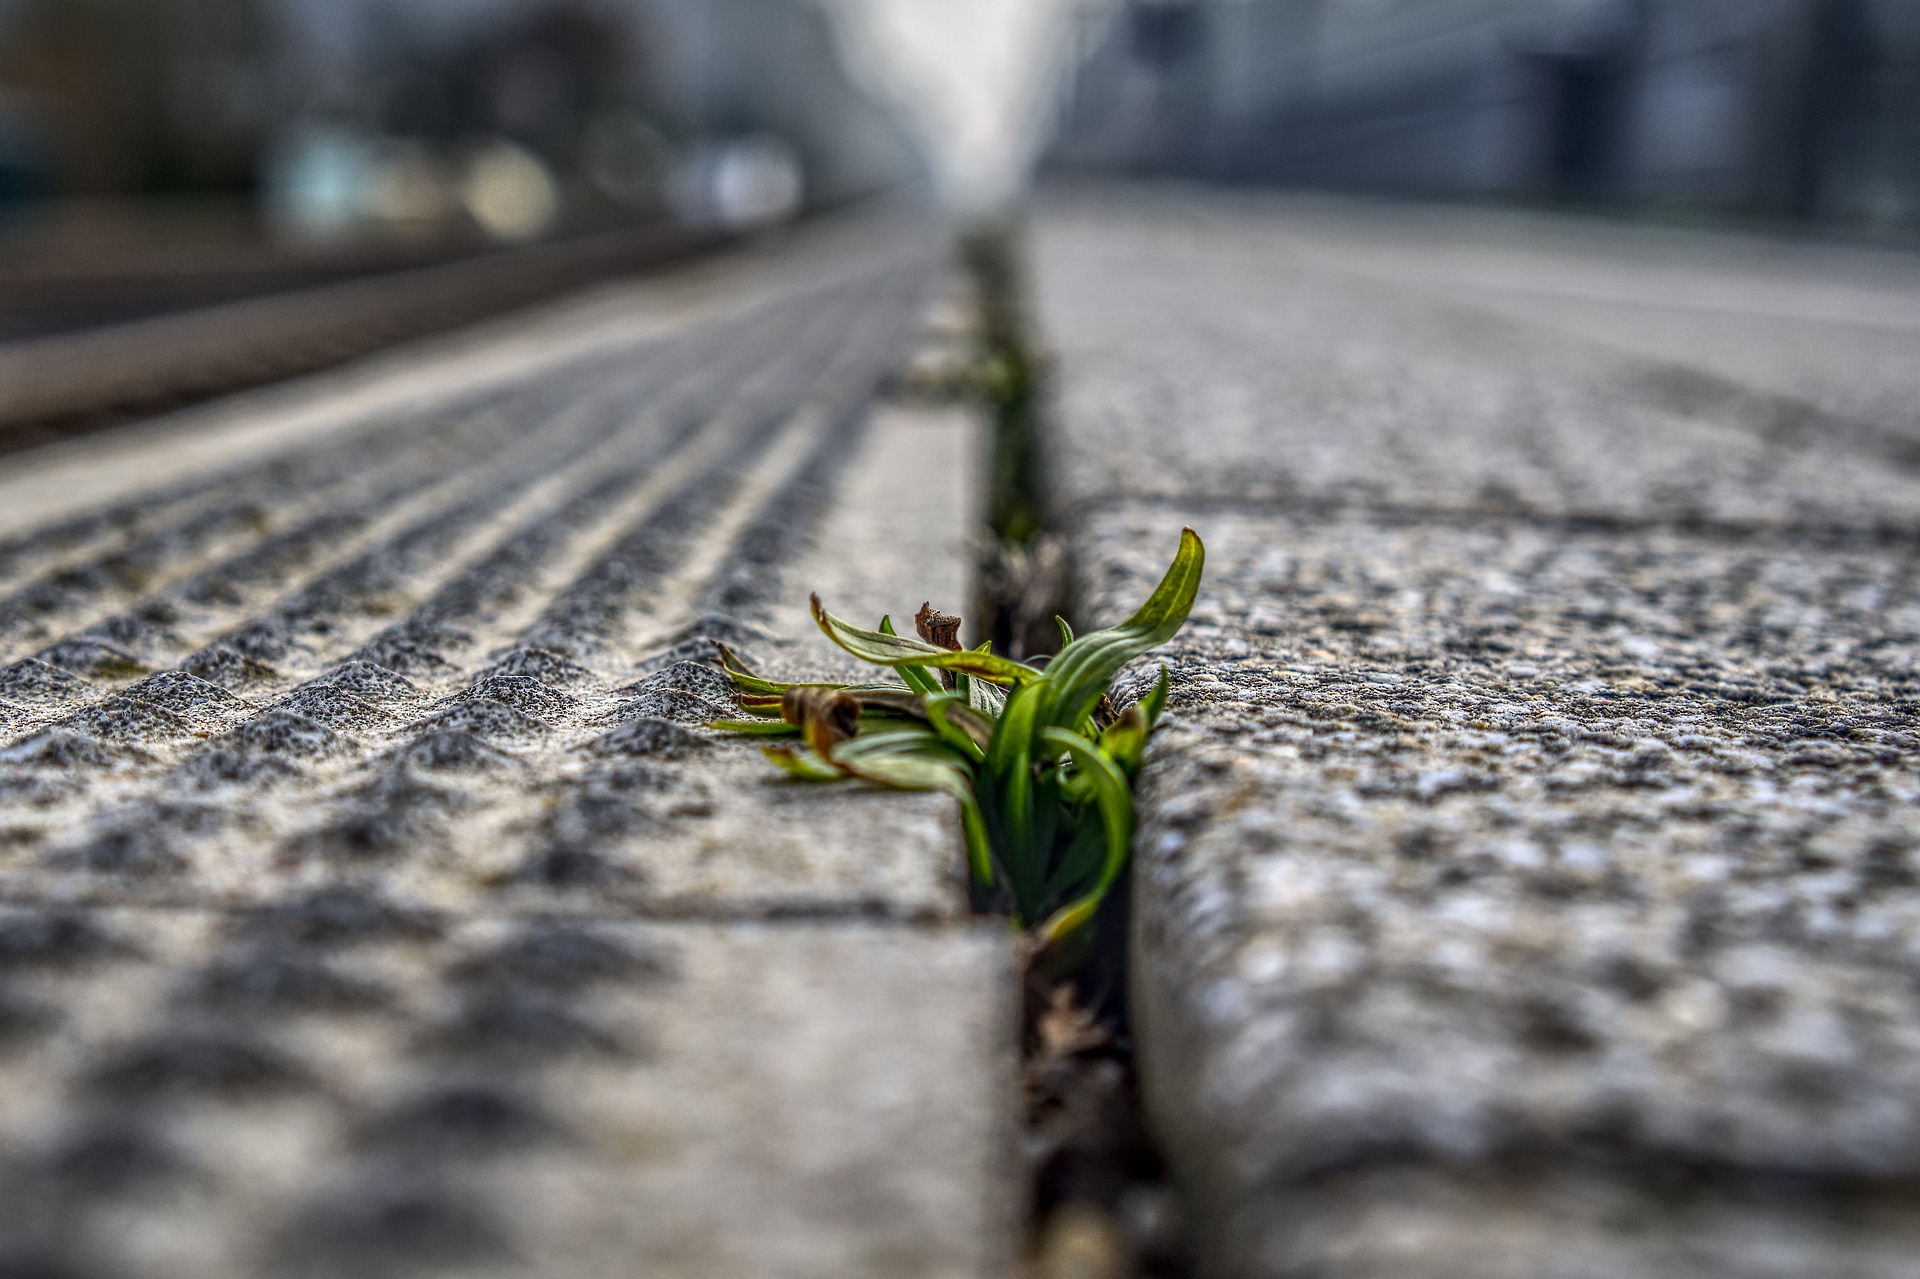 A small plant struggles to grow in the cracks between paving stones of a city street.